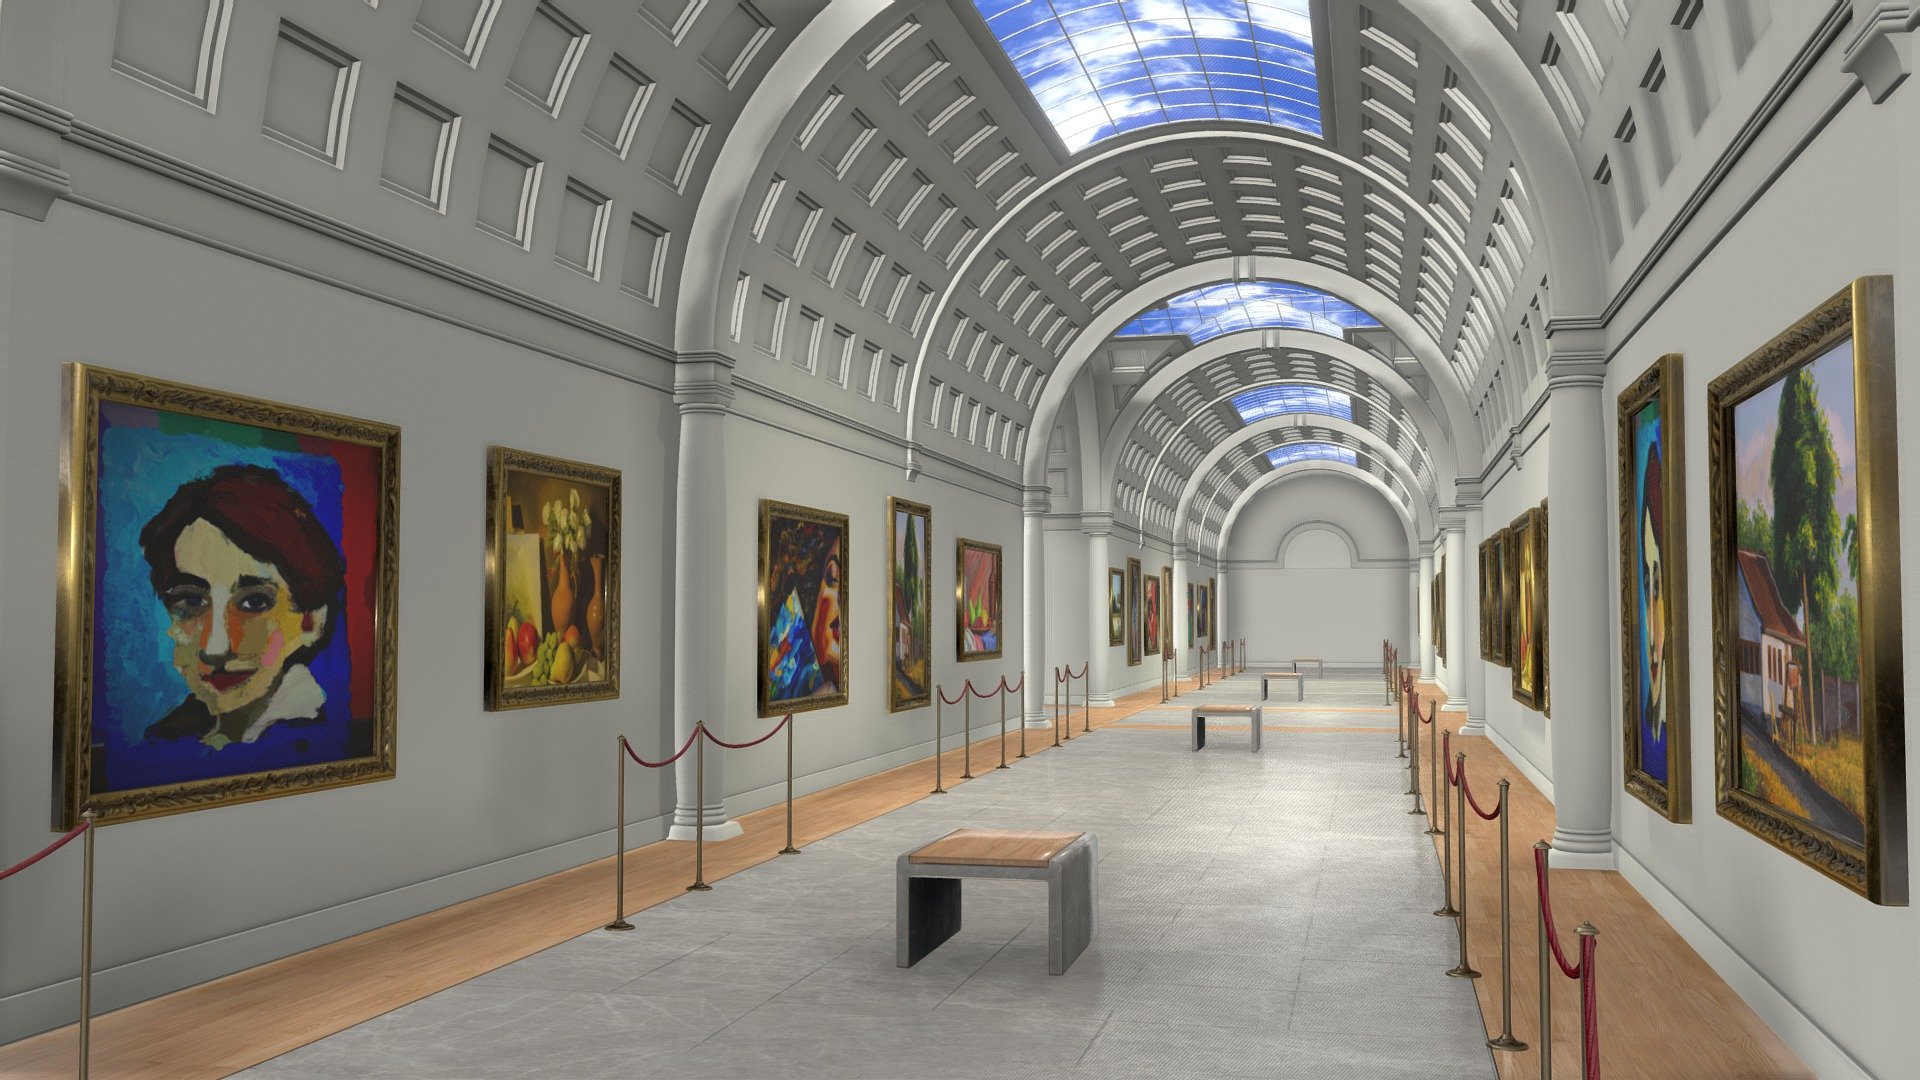 Optimized vr museum. The interior museum asset is attached in one piece in cross shape, but it could be detached and converted in a different modular space. To modify the space, only have to add or removing parts. It only uses 1 material with 5 PBR textures in 4096x4096 (color, metallic, roughness, normal, Ao and emissive). The 3d model has three separate assets: 1 the main museum building, 2 the canvas and separators and 3  pictures only for visualization purpose. The space is made in real measures and as a curiosity, most of the parts were made with pi measures 3d model